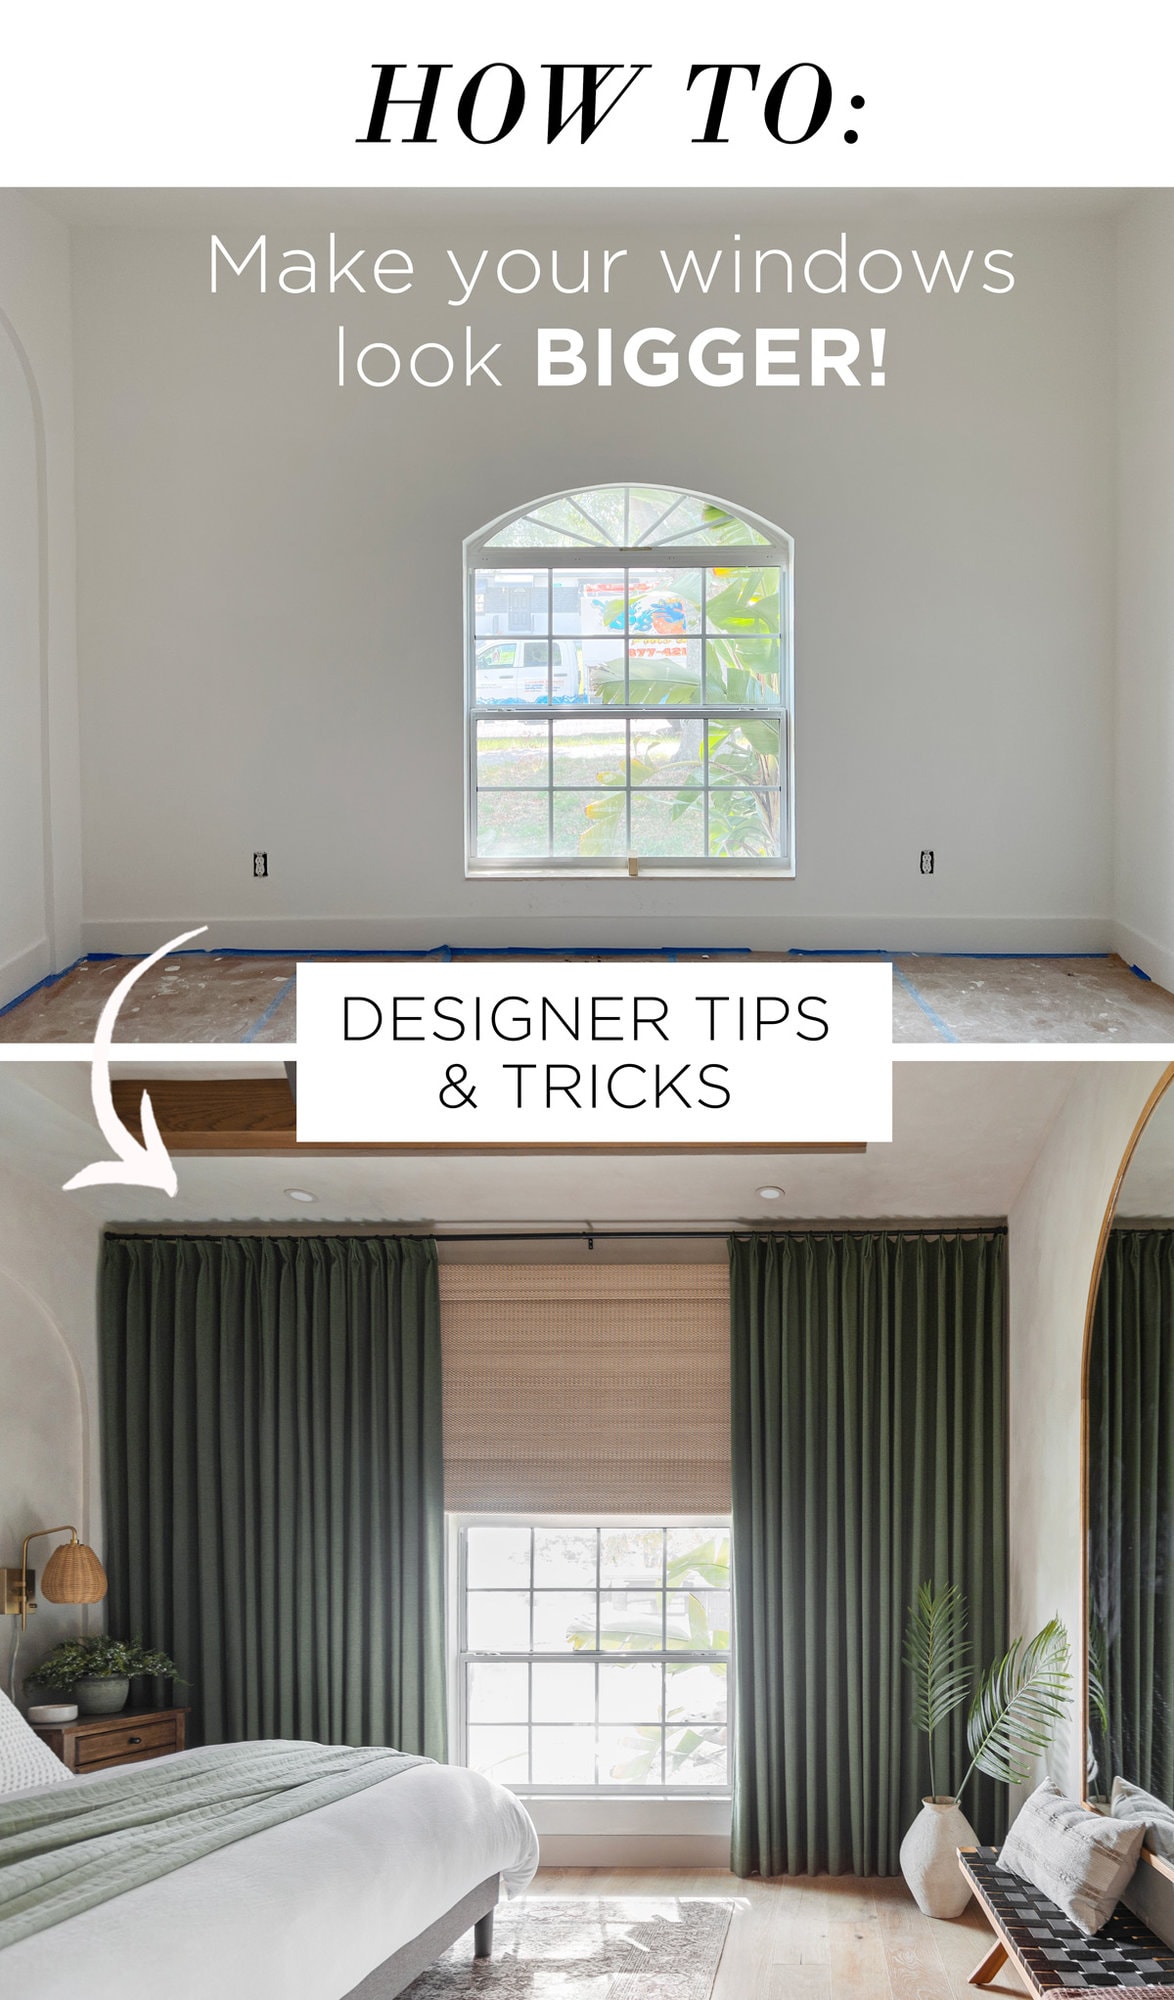 How to make windows look bigger with curtains and shades - Jenna Sue Design